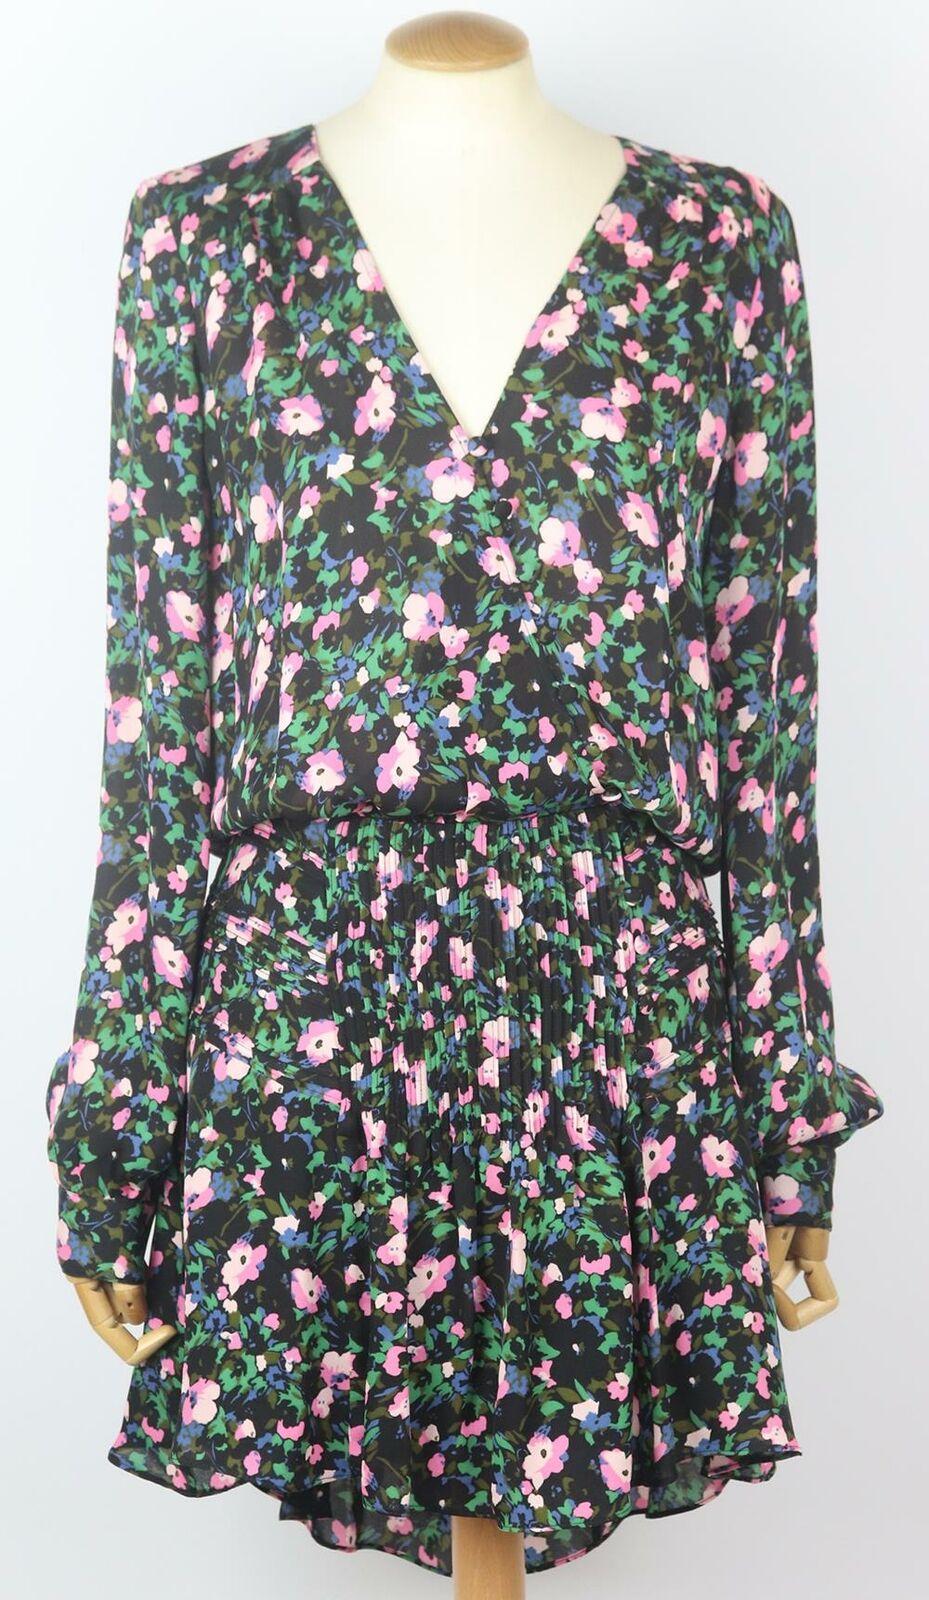 This Veronica Beard 'Naomi' silk dress is printed with painterly florals in pink, blue and green, and features asymmetric buttons along the front and a pintucked waist panel.
Multicolored silk
Button fastenings at front, zip fastening at side.
100%